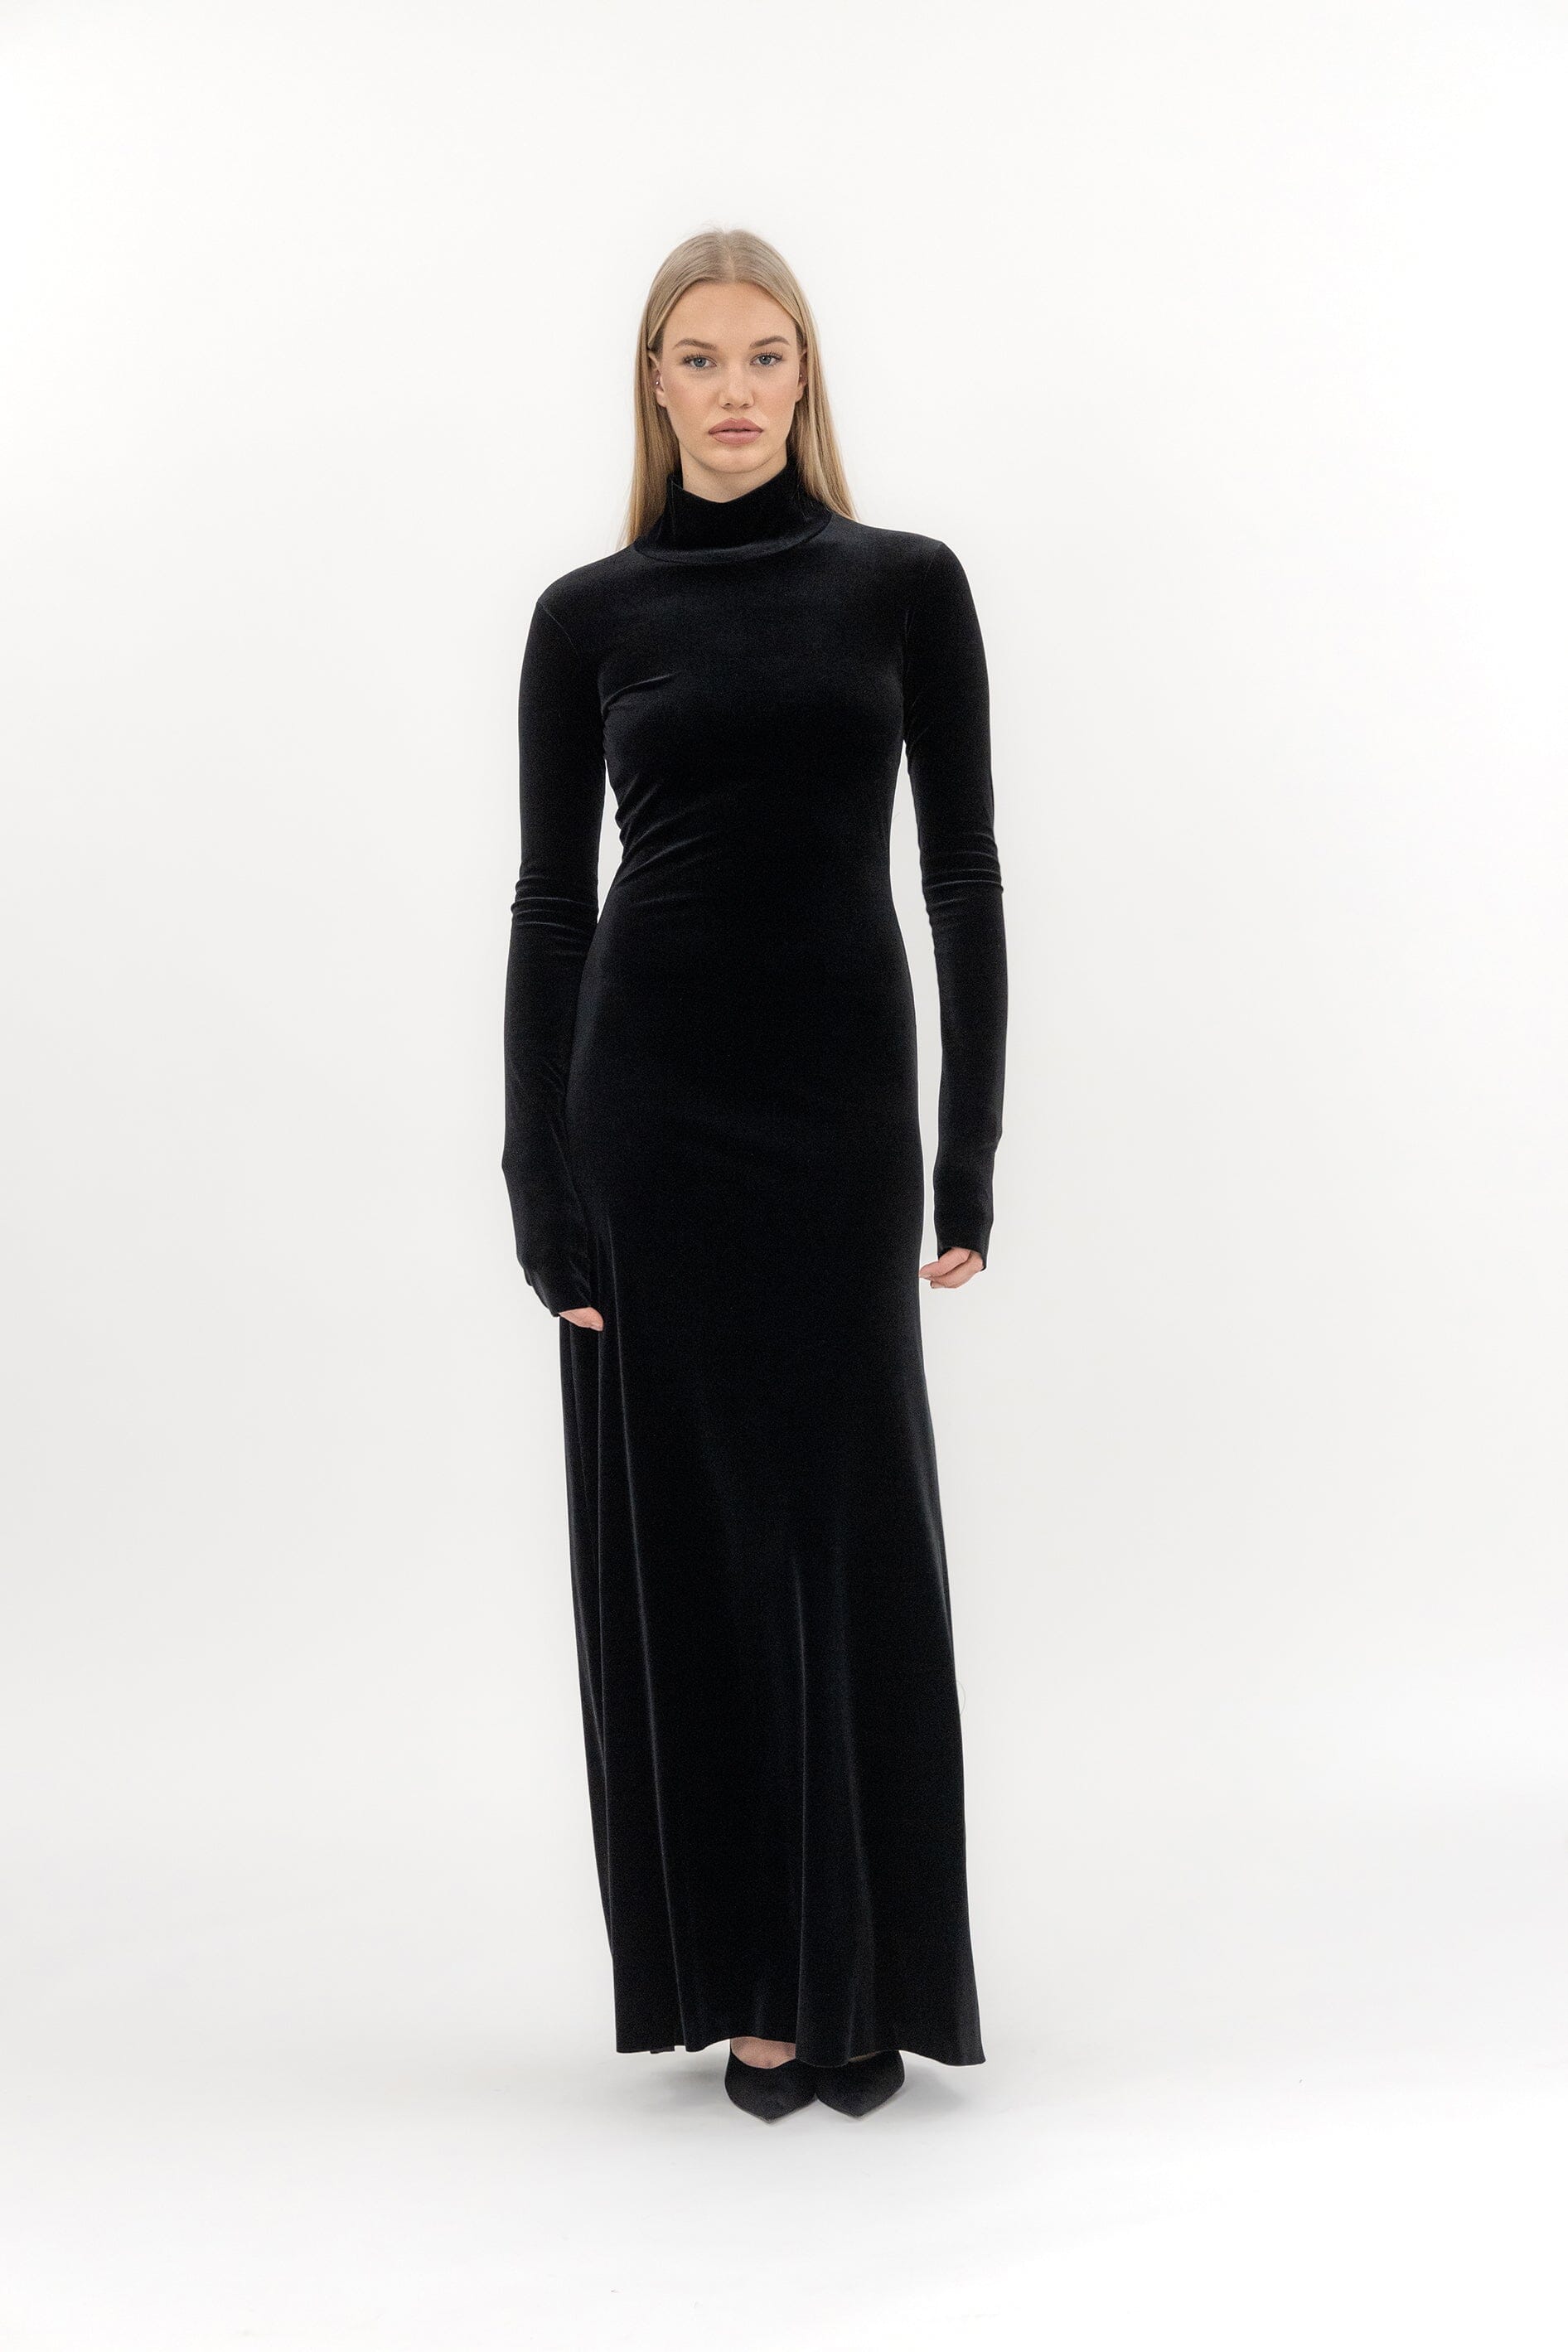  Say No More Gown Black Product SIA Glamoralle